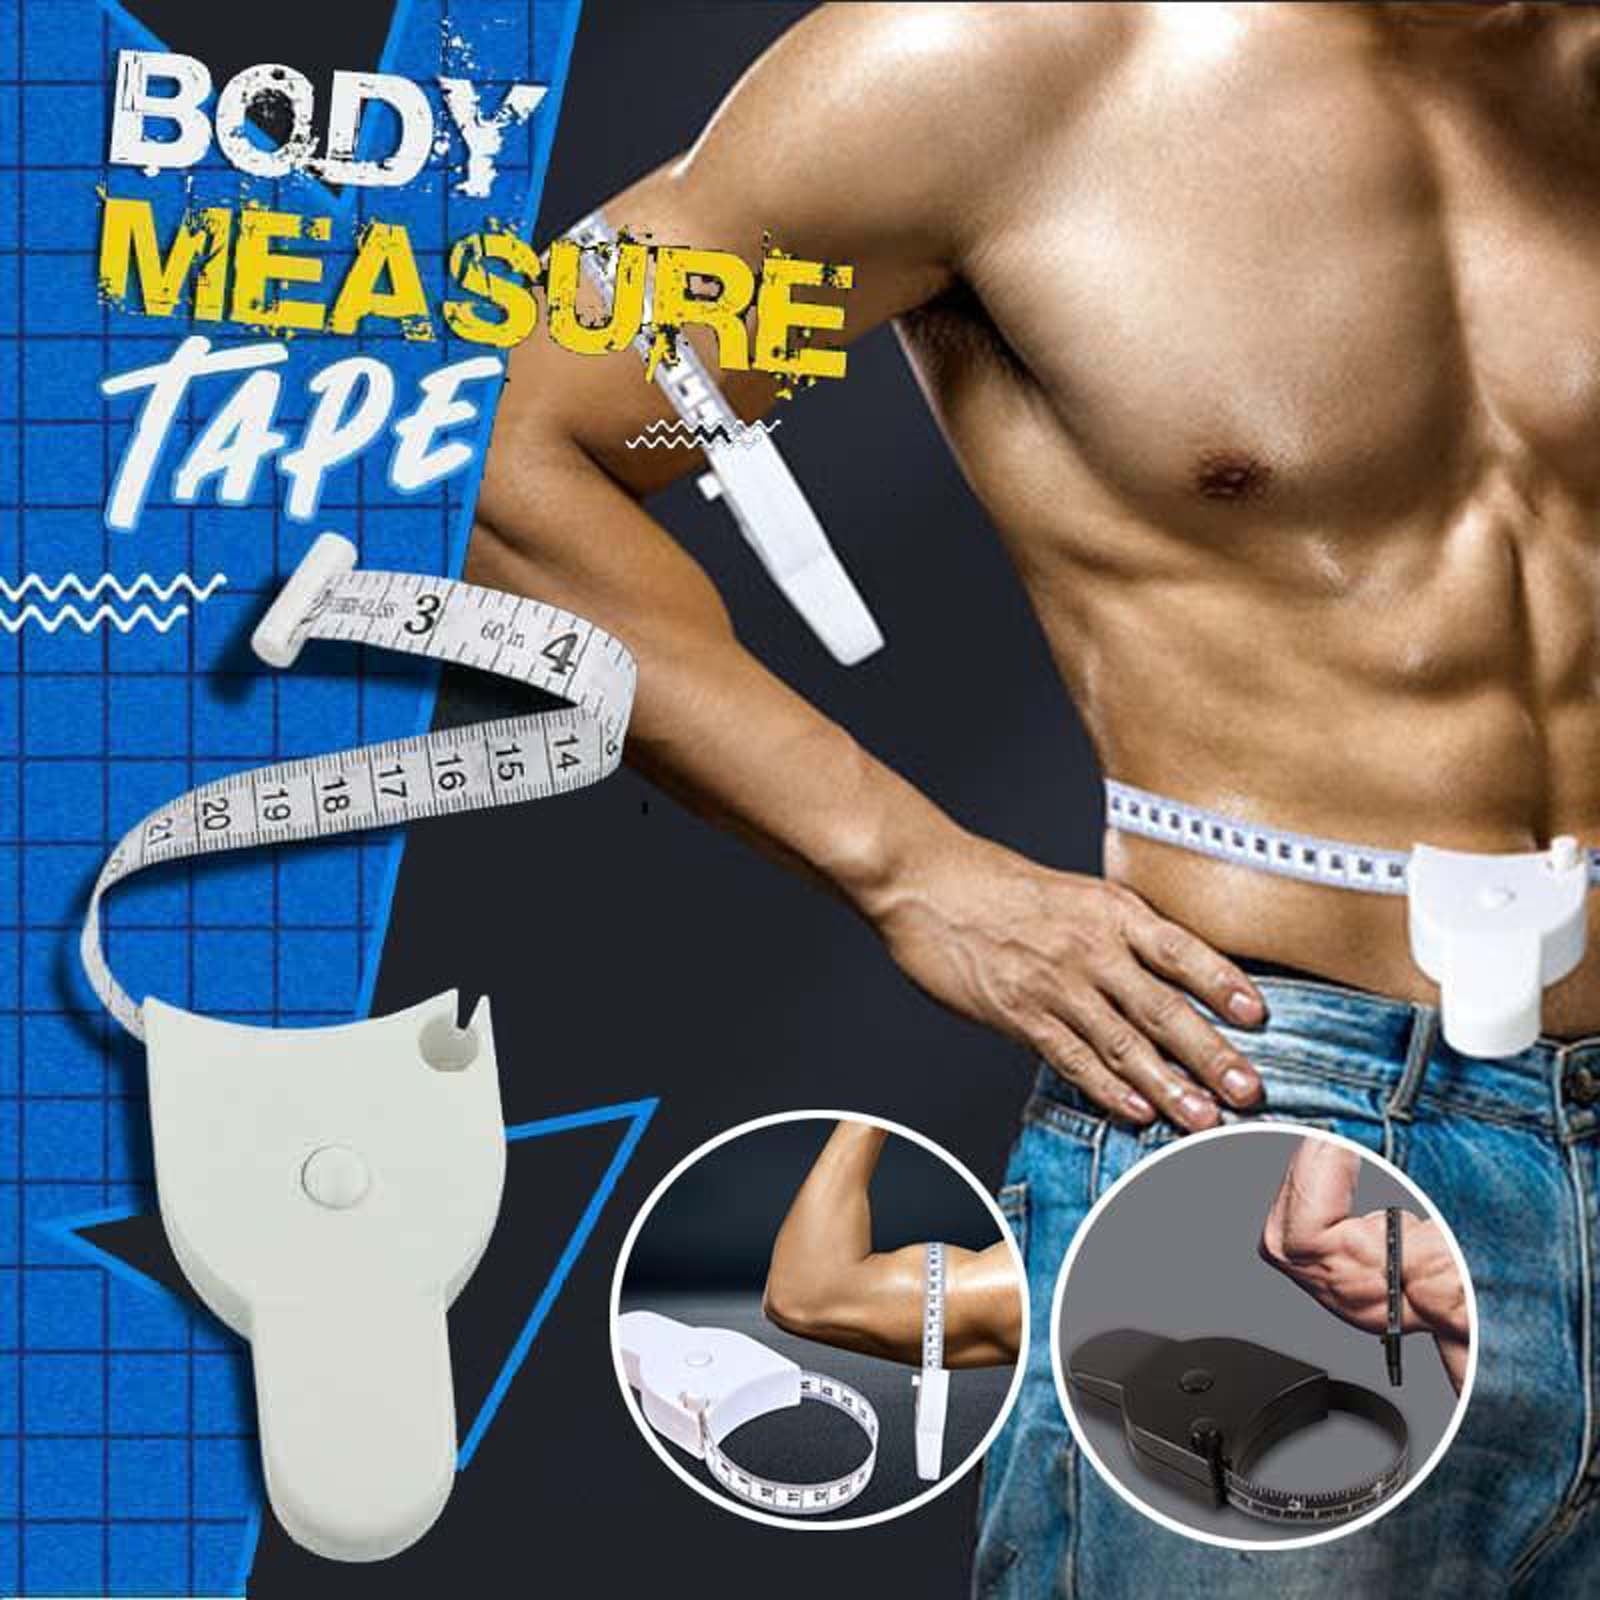 2Pcs Body Measuring Tape, Measures 60 Inch (150 cm) with Lock Pin and Black  Push Button Retraction, Yellow & White Tape Measure, Accurate Tape